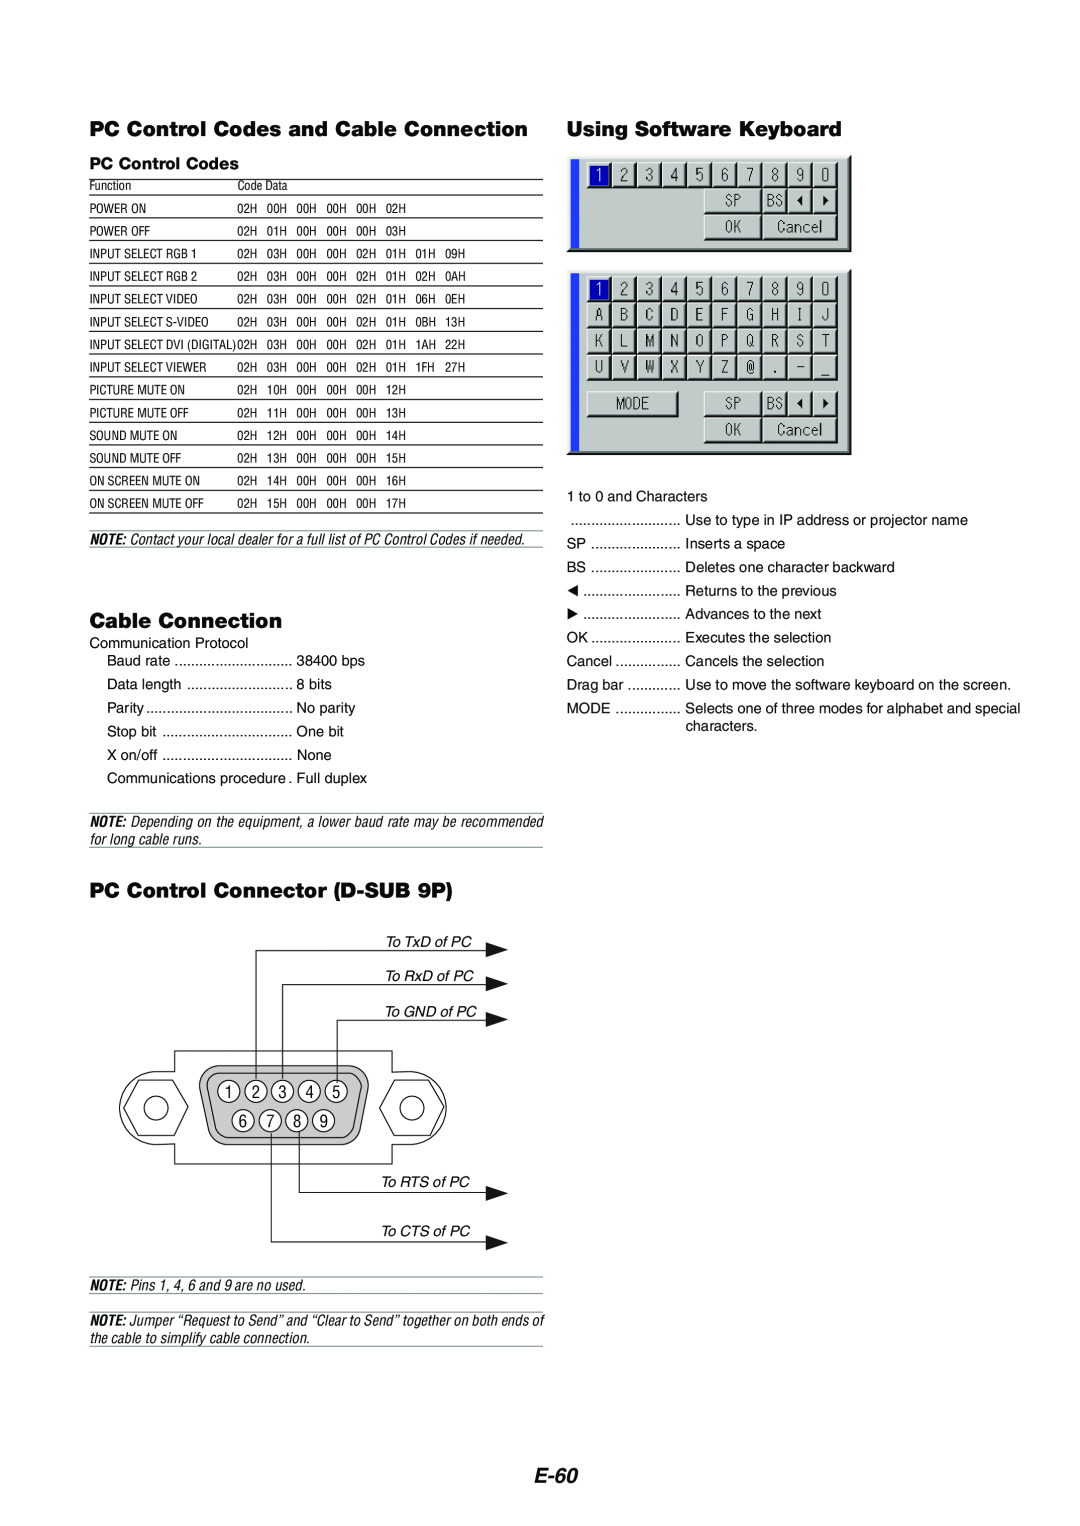 NEC MT1065/MT1060 PC Control Codes and Cable Connection, PC Control Connector D-SUB 9P, Using Software Keyboard, E-60 